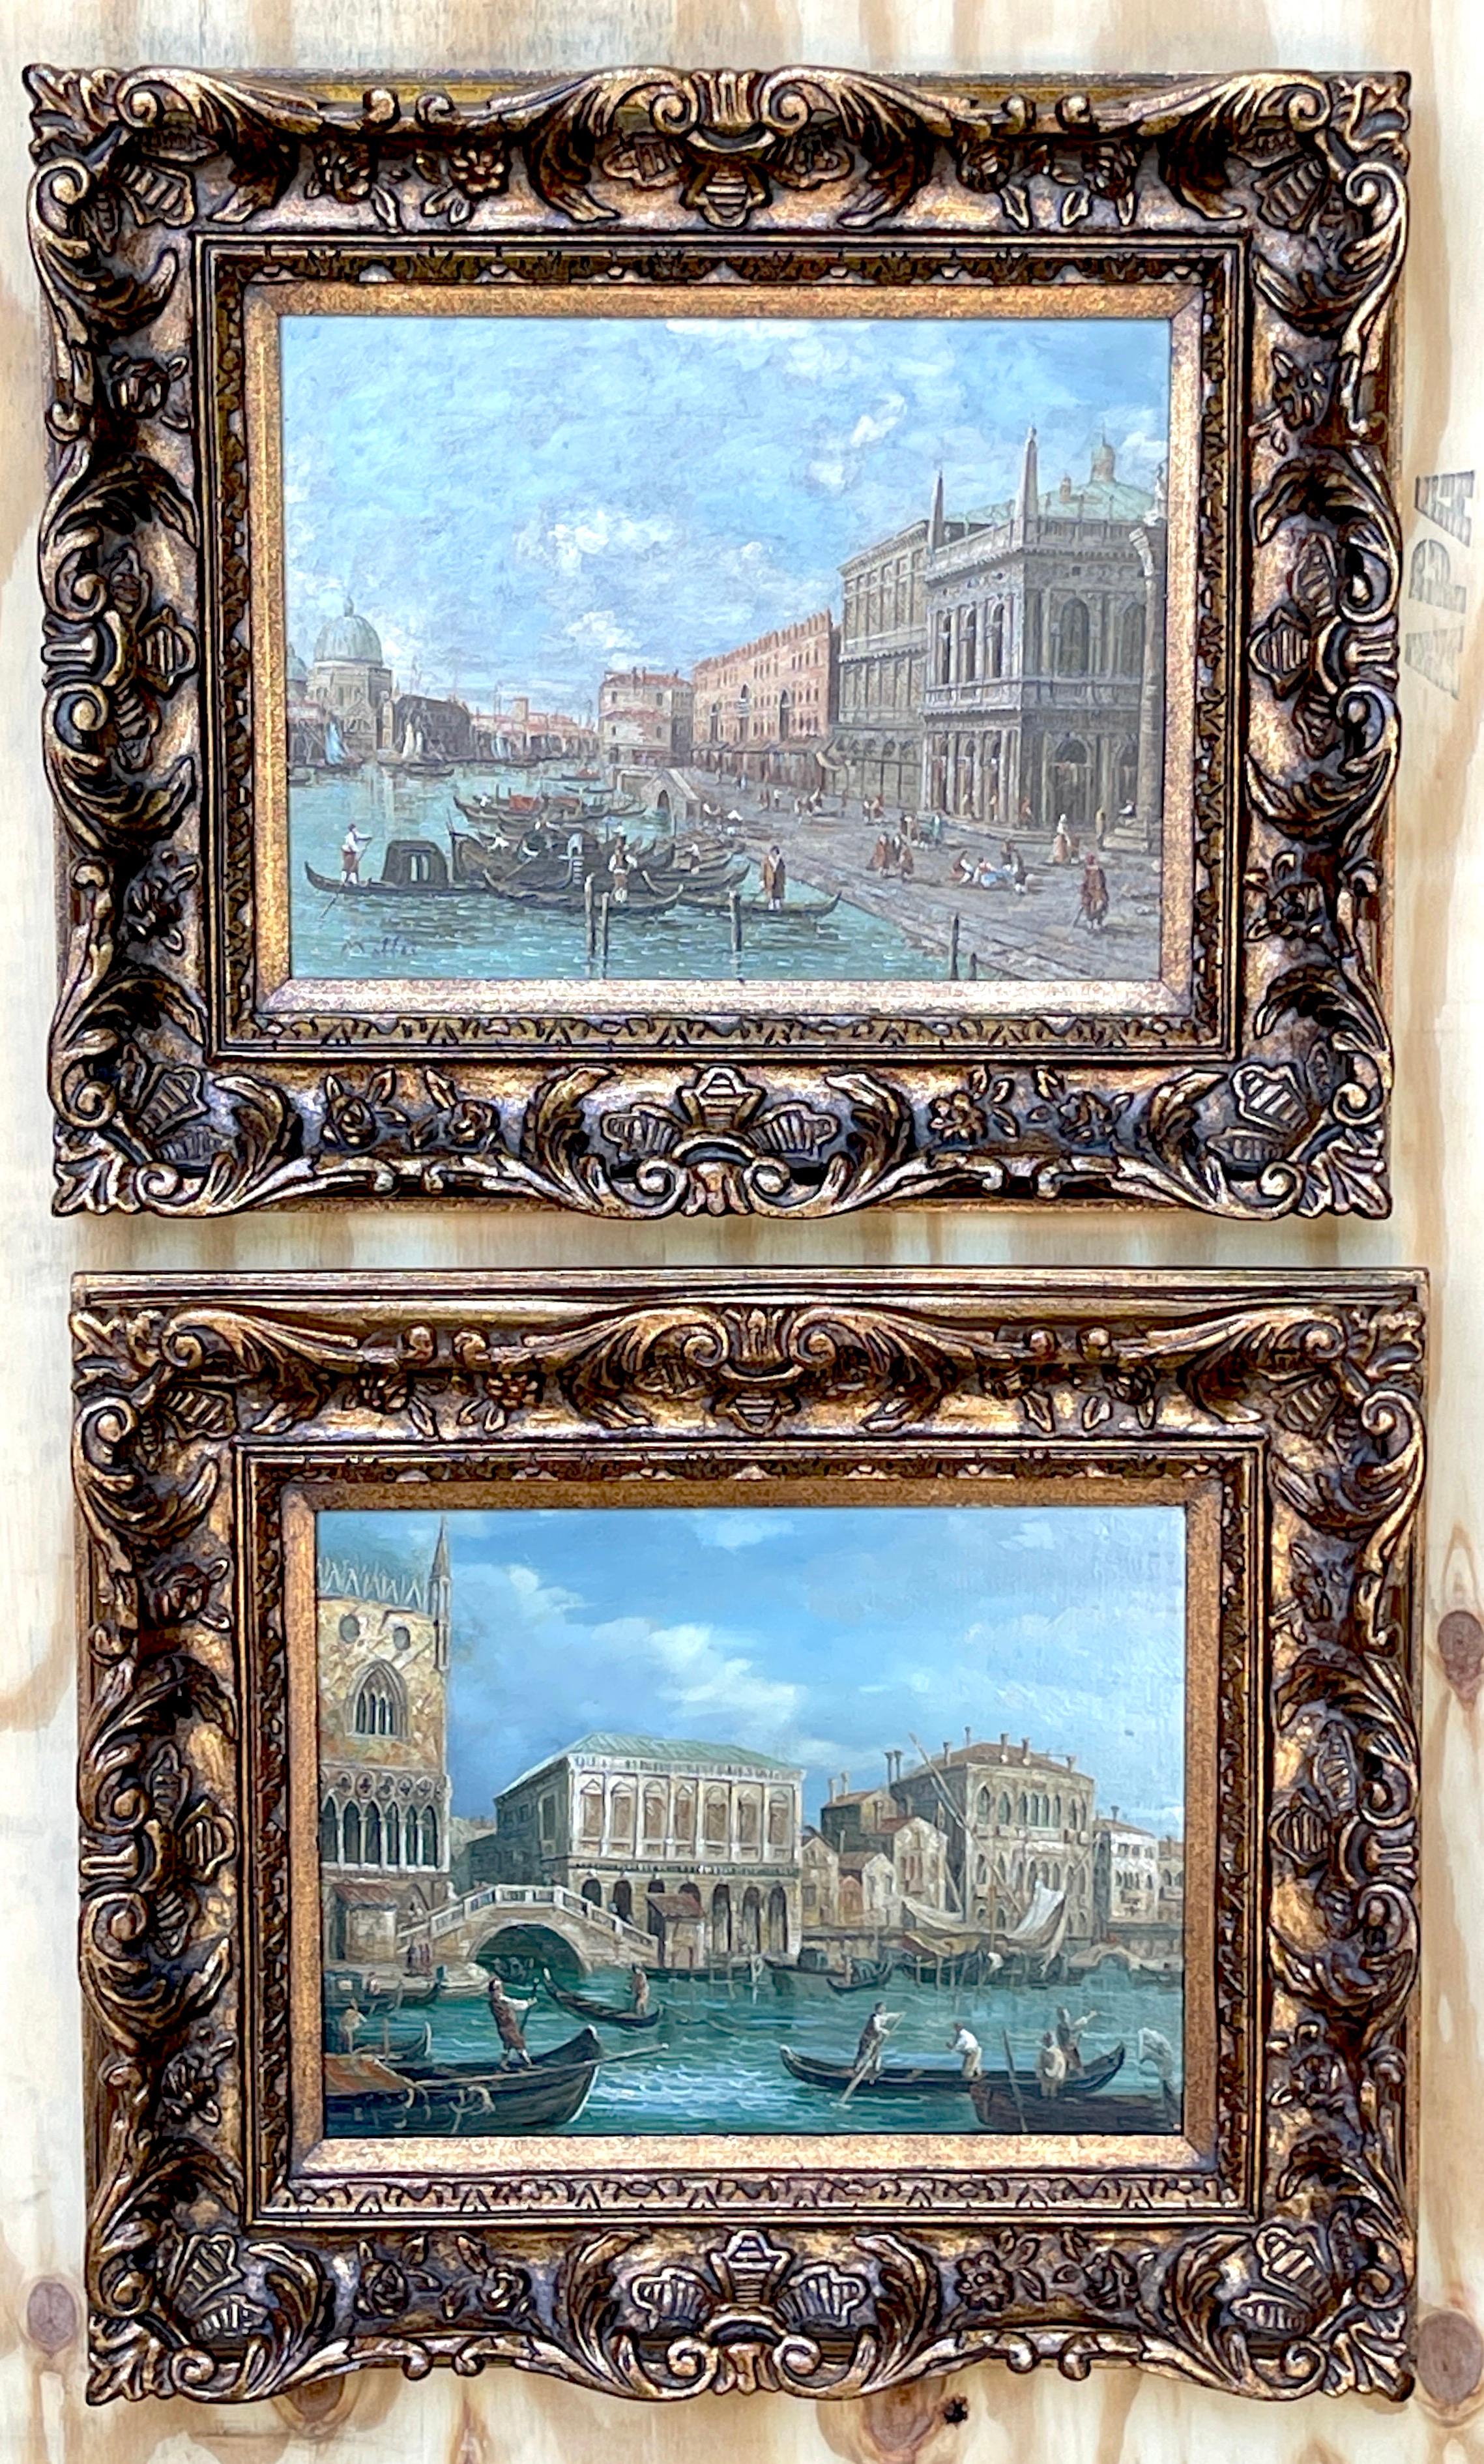 Pair of 20th Century decorative Venetian canal paintings, After Canaletto
Each one Signed 'Maffel'

A stunning pair of late 20th Century oils on canvas, views of the Grand Canal in Venice Italy, in ornate carved giltwood frames. 
After works by